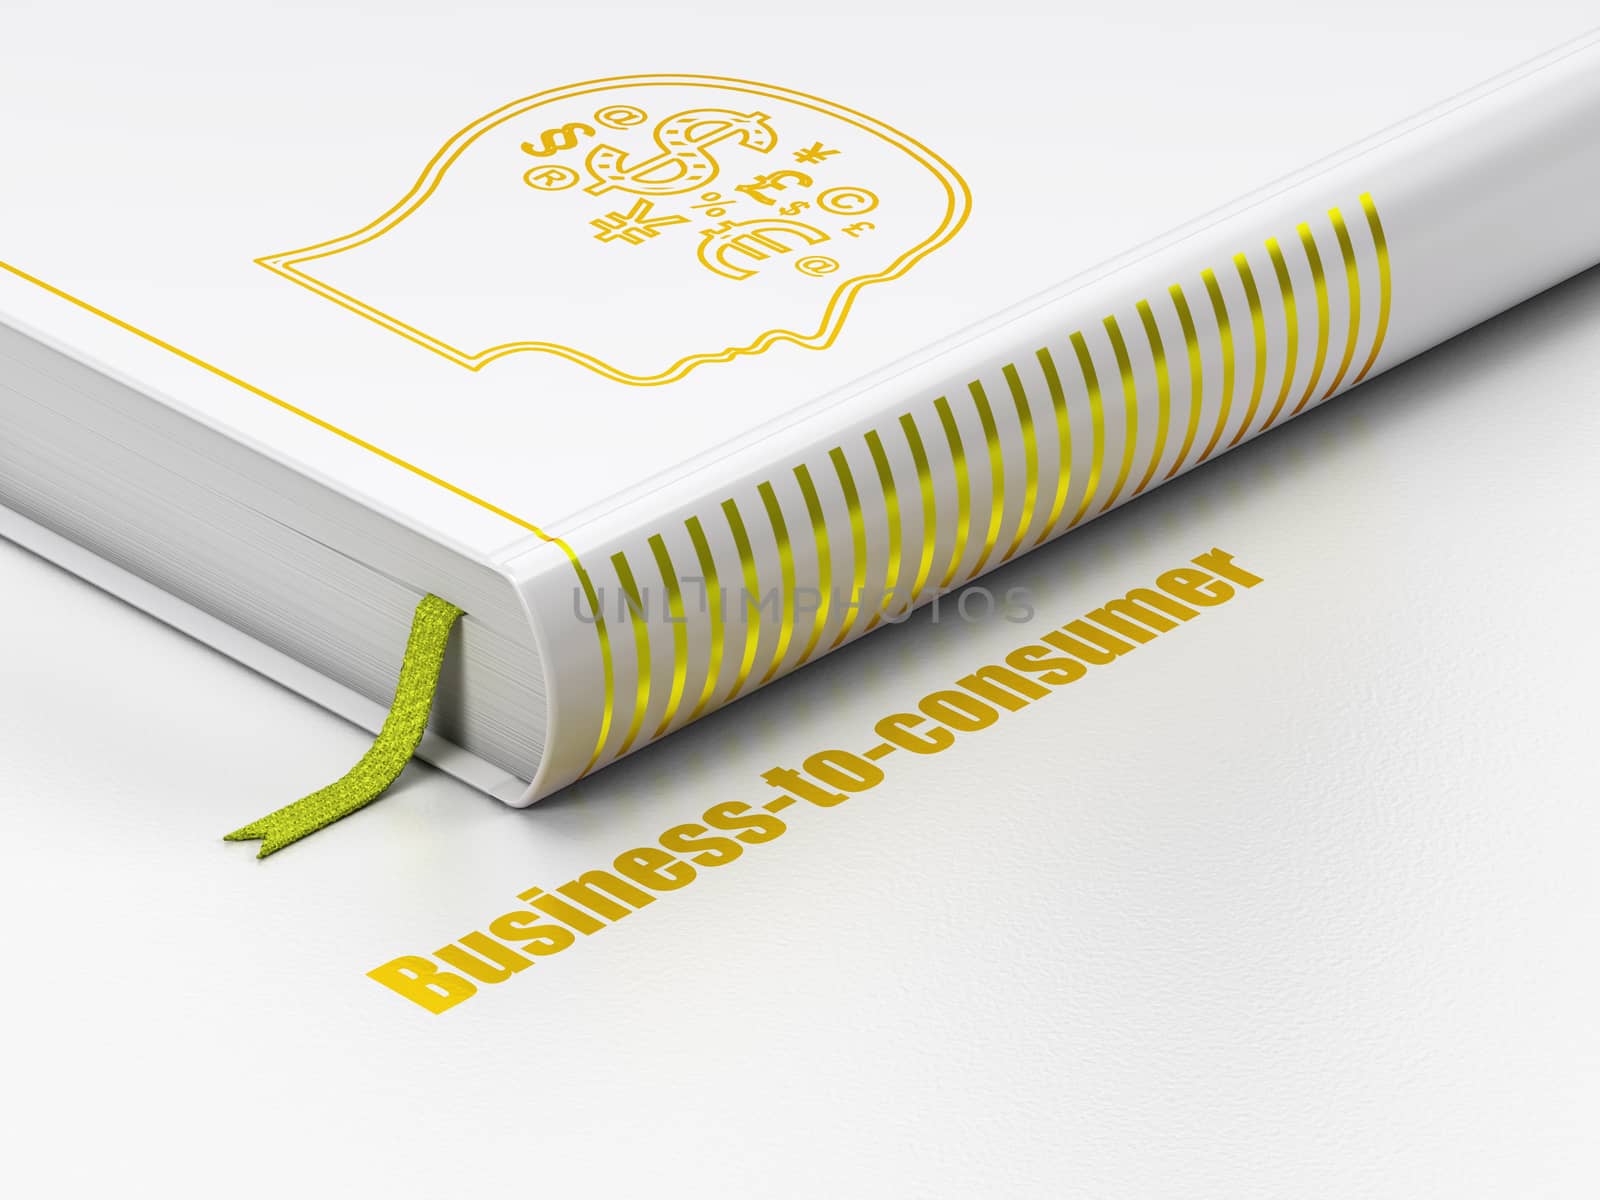 Finance concept: closed book with Gold Head With Finance Symbol icon and text Business-to-consumer on floor, white background, 3D rendering